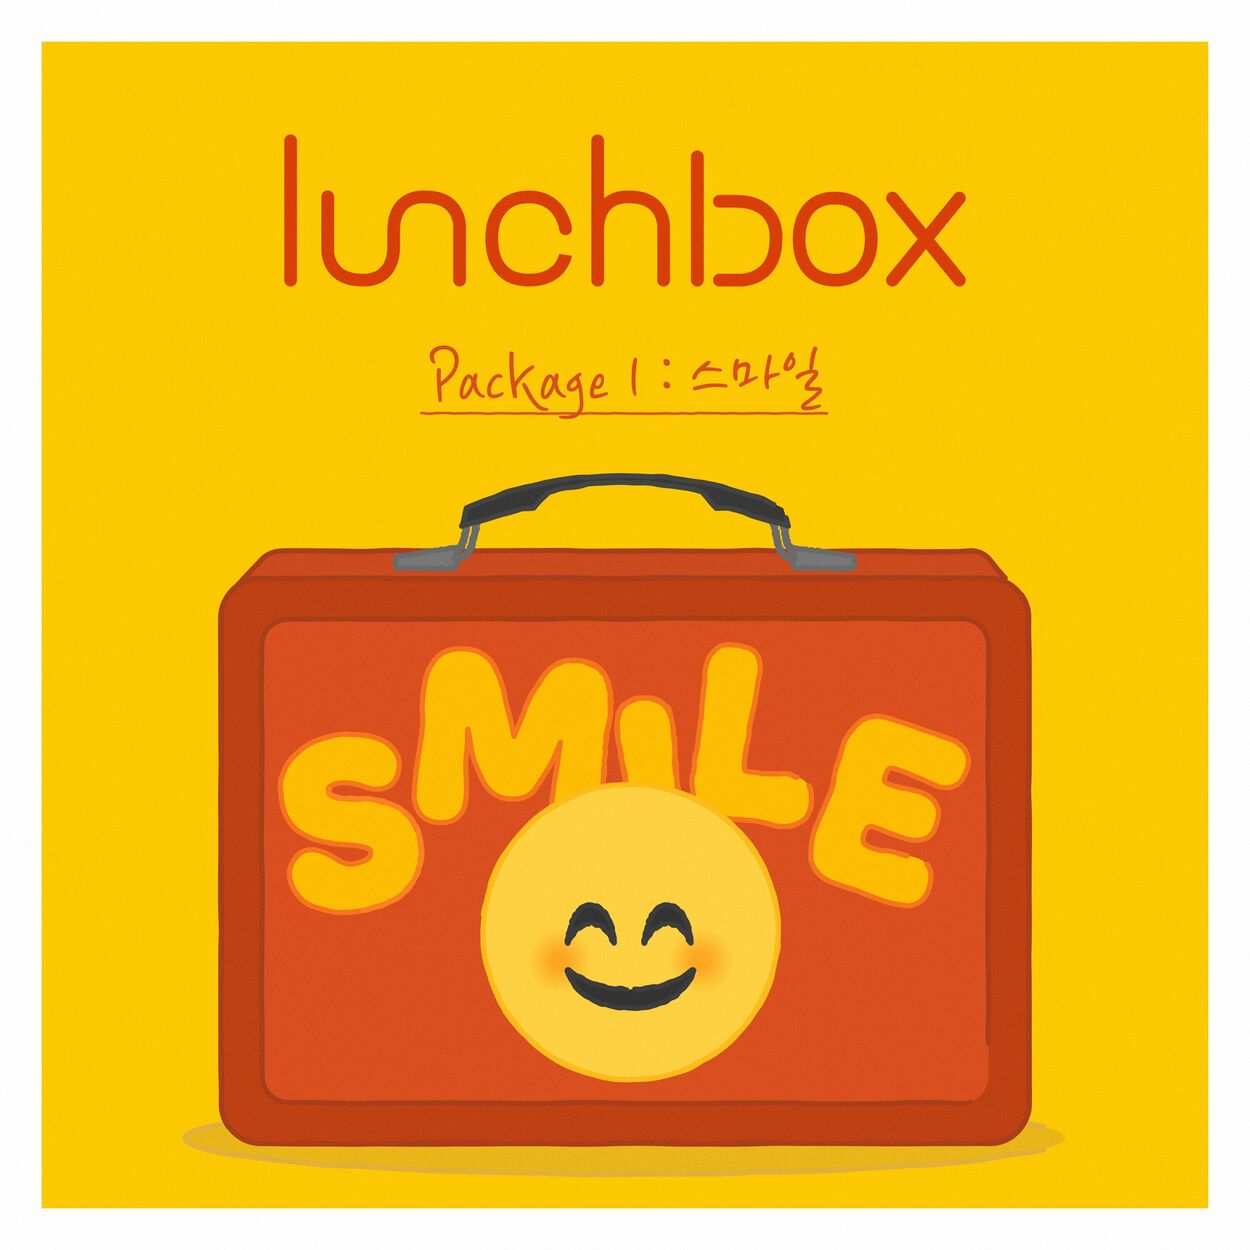 Lunchbox – Package 1 : Smile